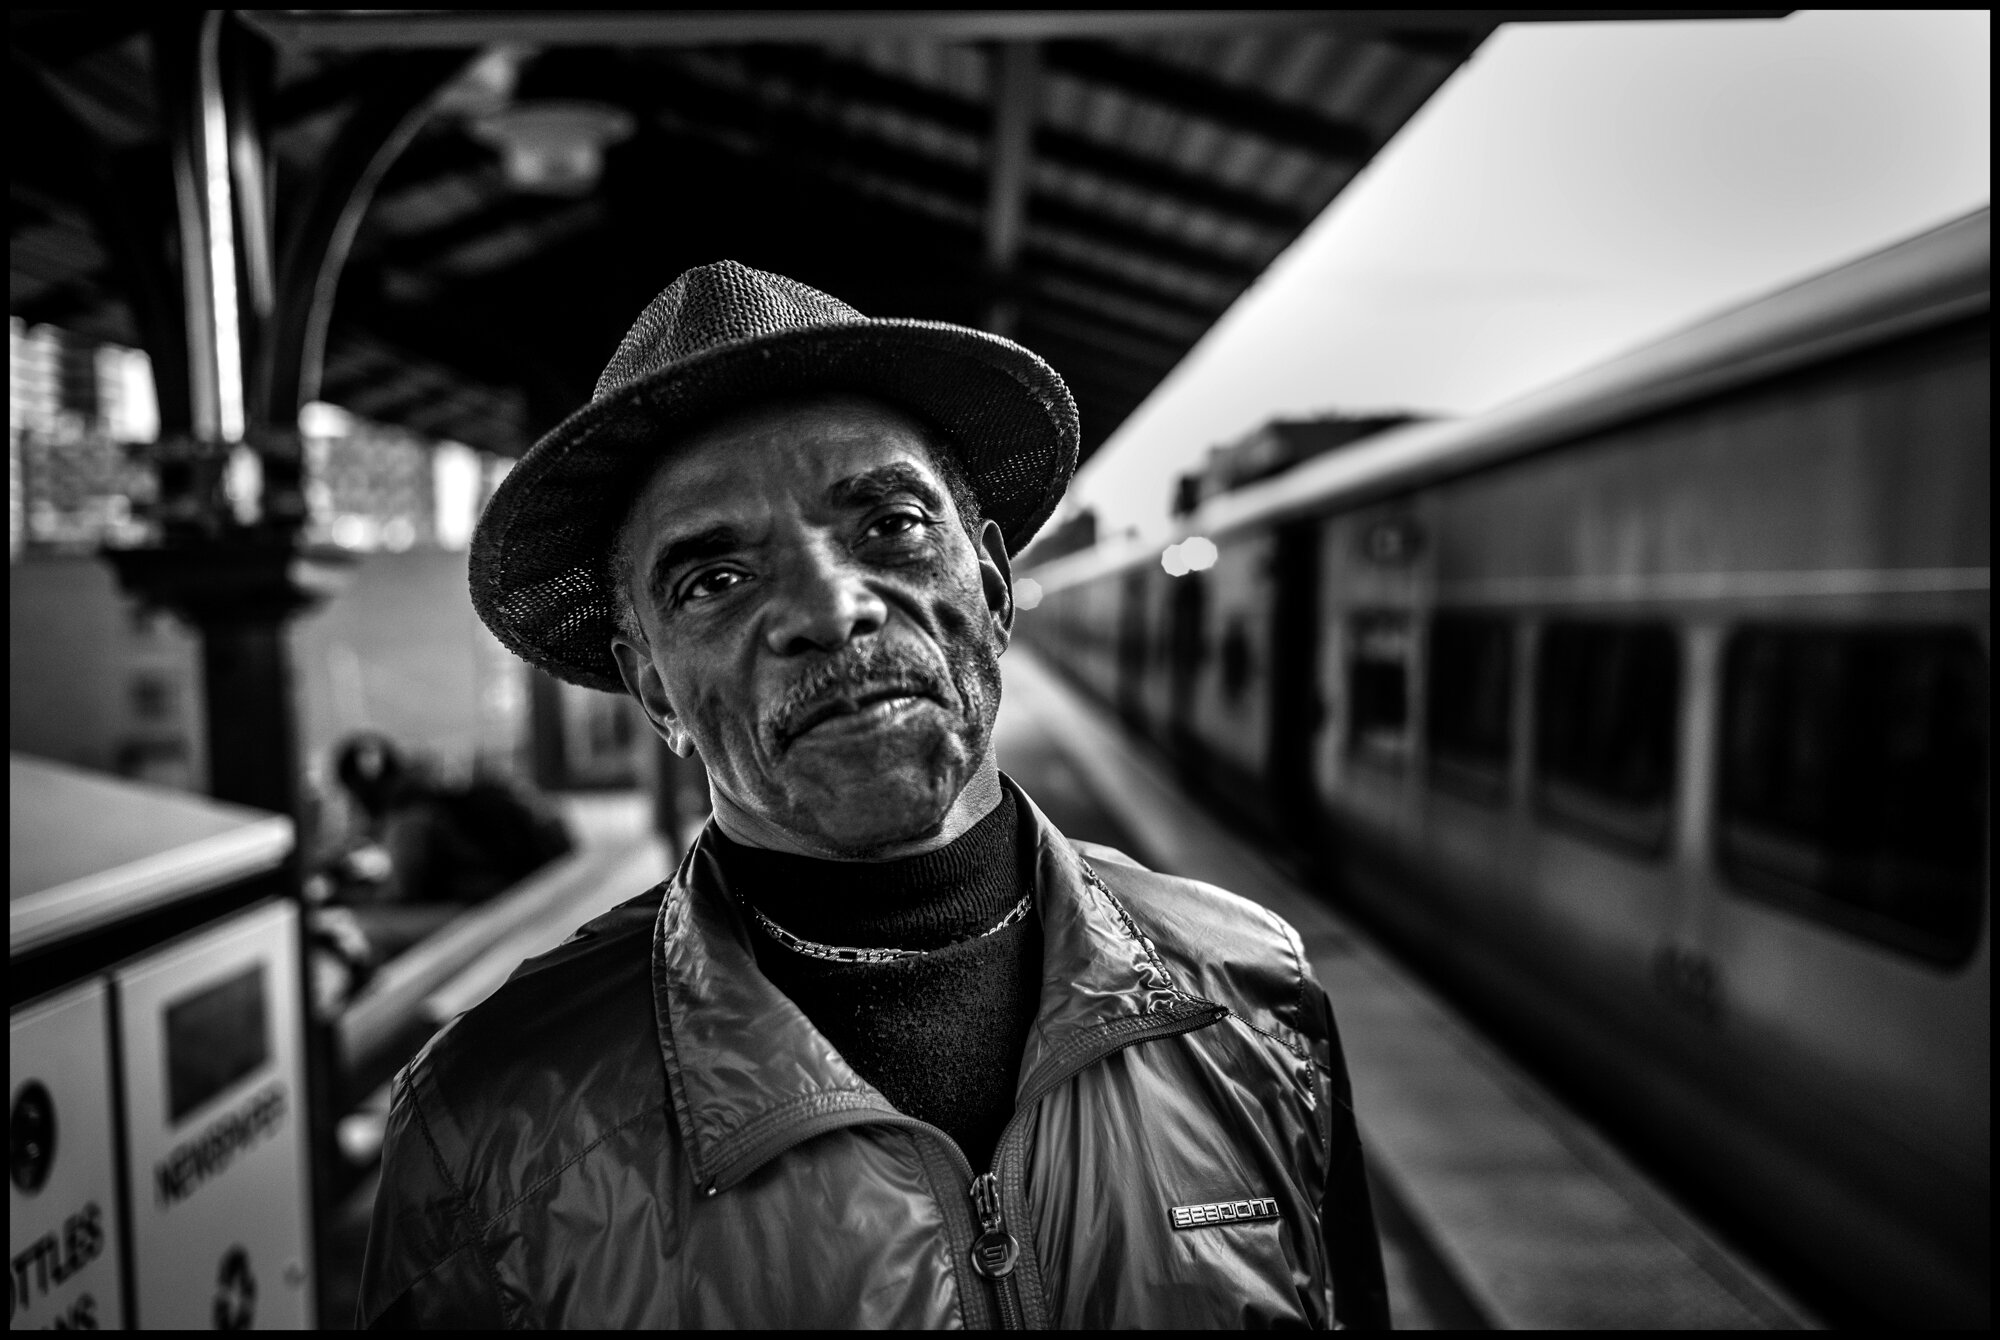  C. Marsh who told me he is a doctor, waits for a train home at the 125th Street train station in Harlem. I asked him who he felt about the situation, and he said, “please don’t aske me that-it’s been a really long day.”  March 24, 2020. © Peter Turn